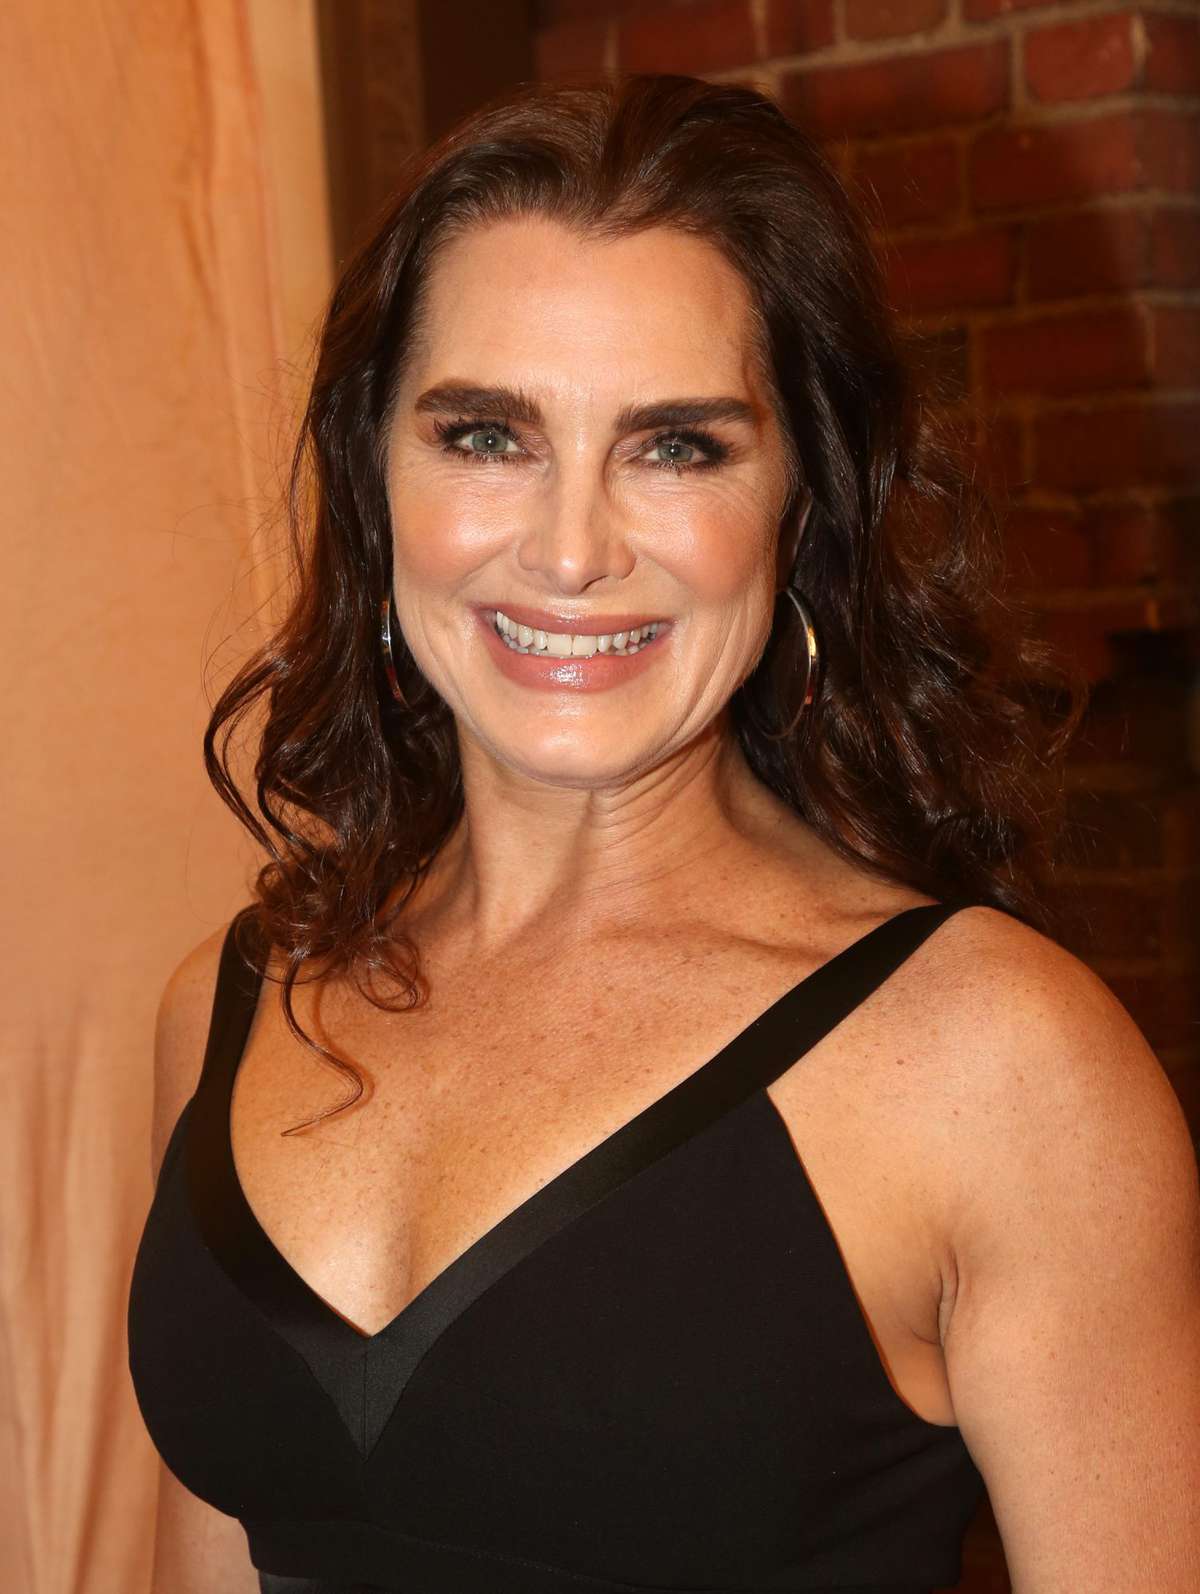 Brooke Shields Just Addressed the "Taboo Subject" of Menopause With the Skincare Find That's Changed Her Skin